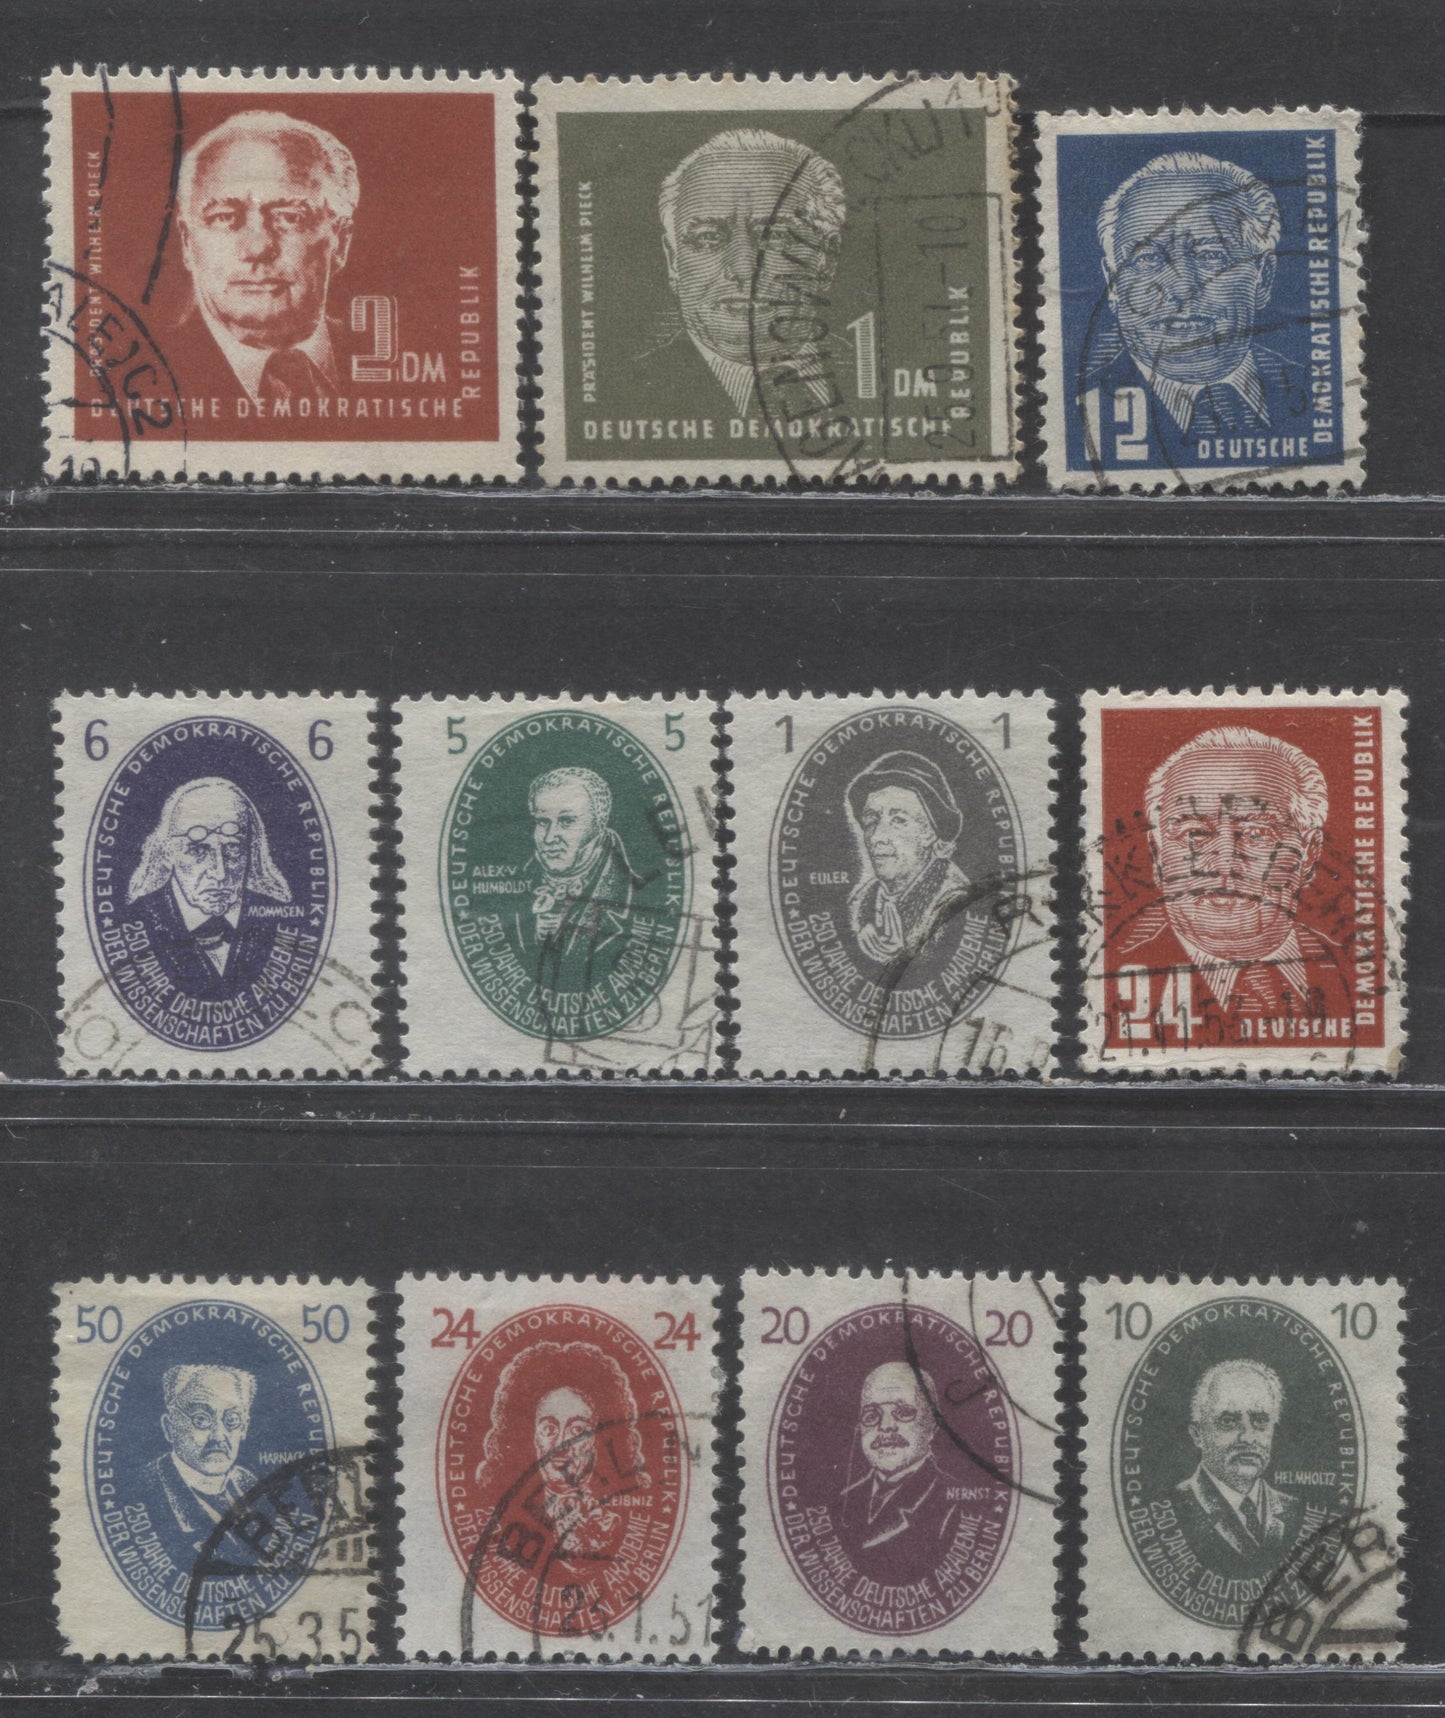 Lot 142 German Democratic Republic SC#54/67 1950-1951 Academy Of Science + Definitives, 11 Fine/Very Fine Used Singles, Click on Listing to See ALL Pictures, 2017 Scott Cat. $81.6 USD